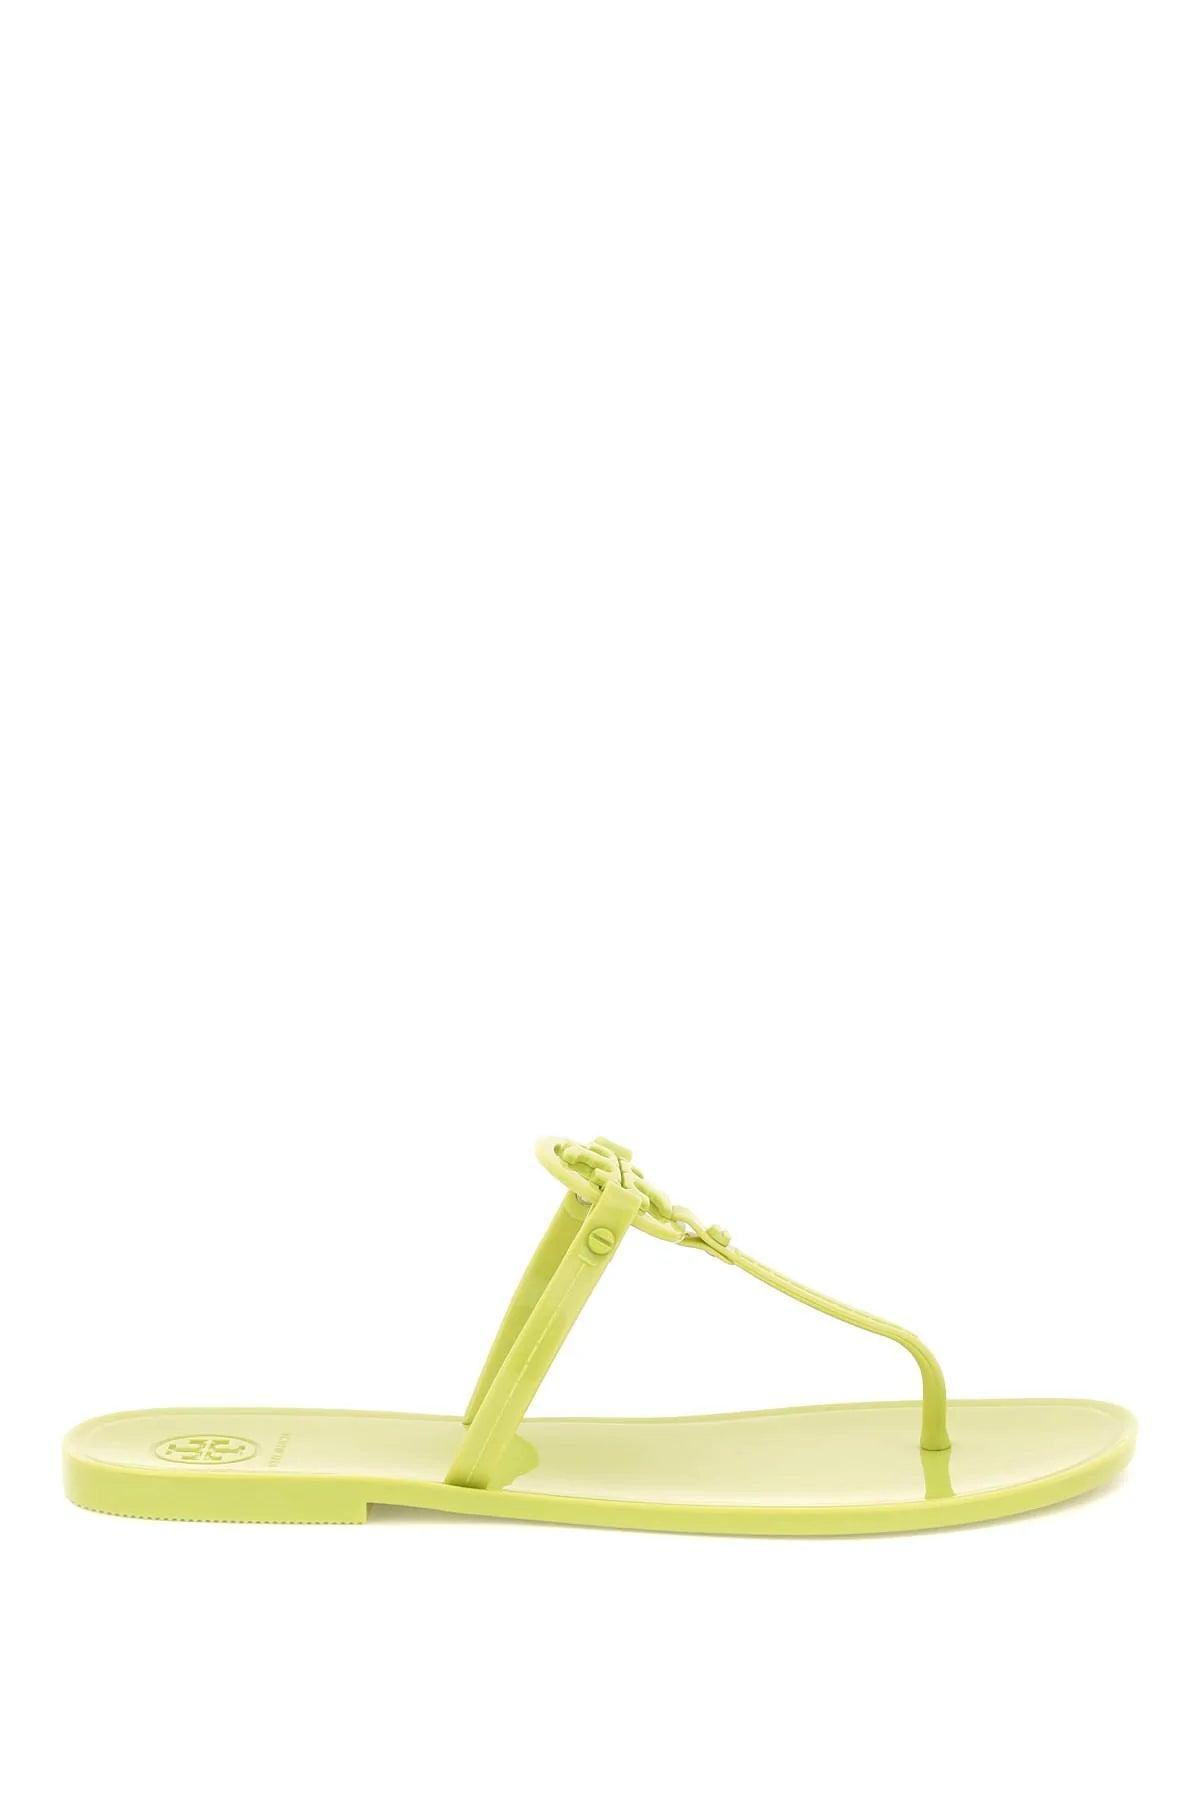 Tory Burch Mini Miller Jelly Thong Sandals in Yellow | Lyst